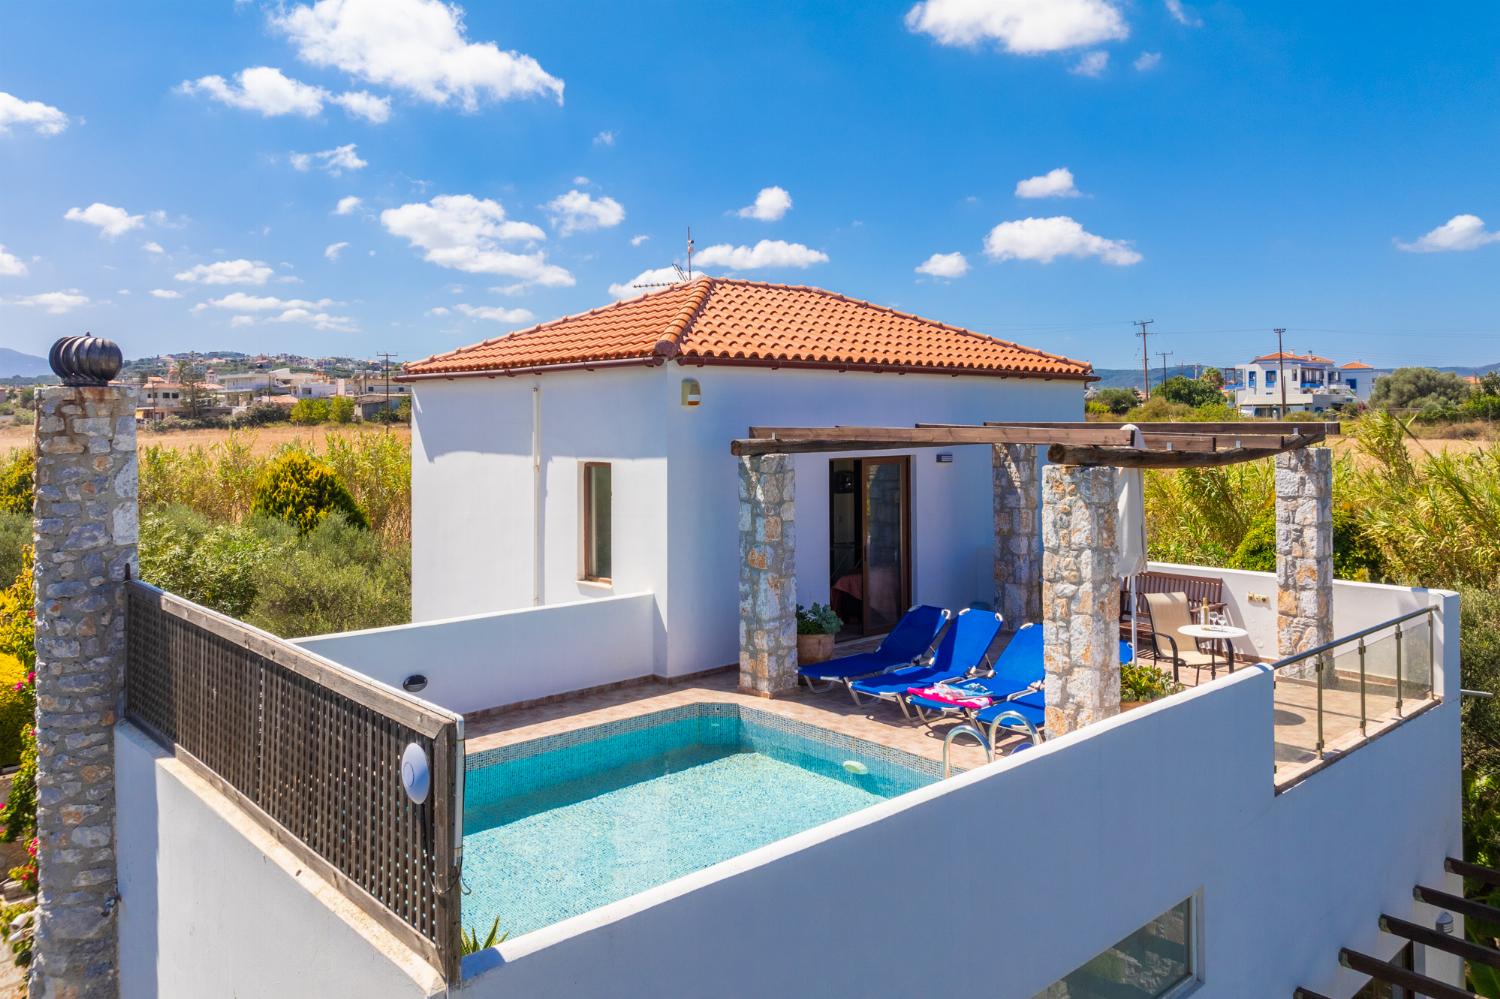 Beautiful villa with private pool, garden, and terrace with sea views